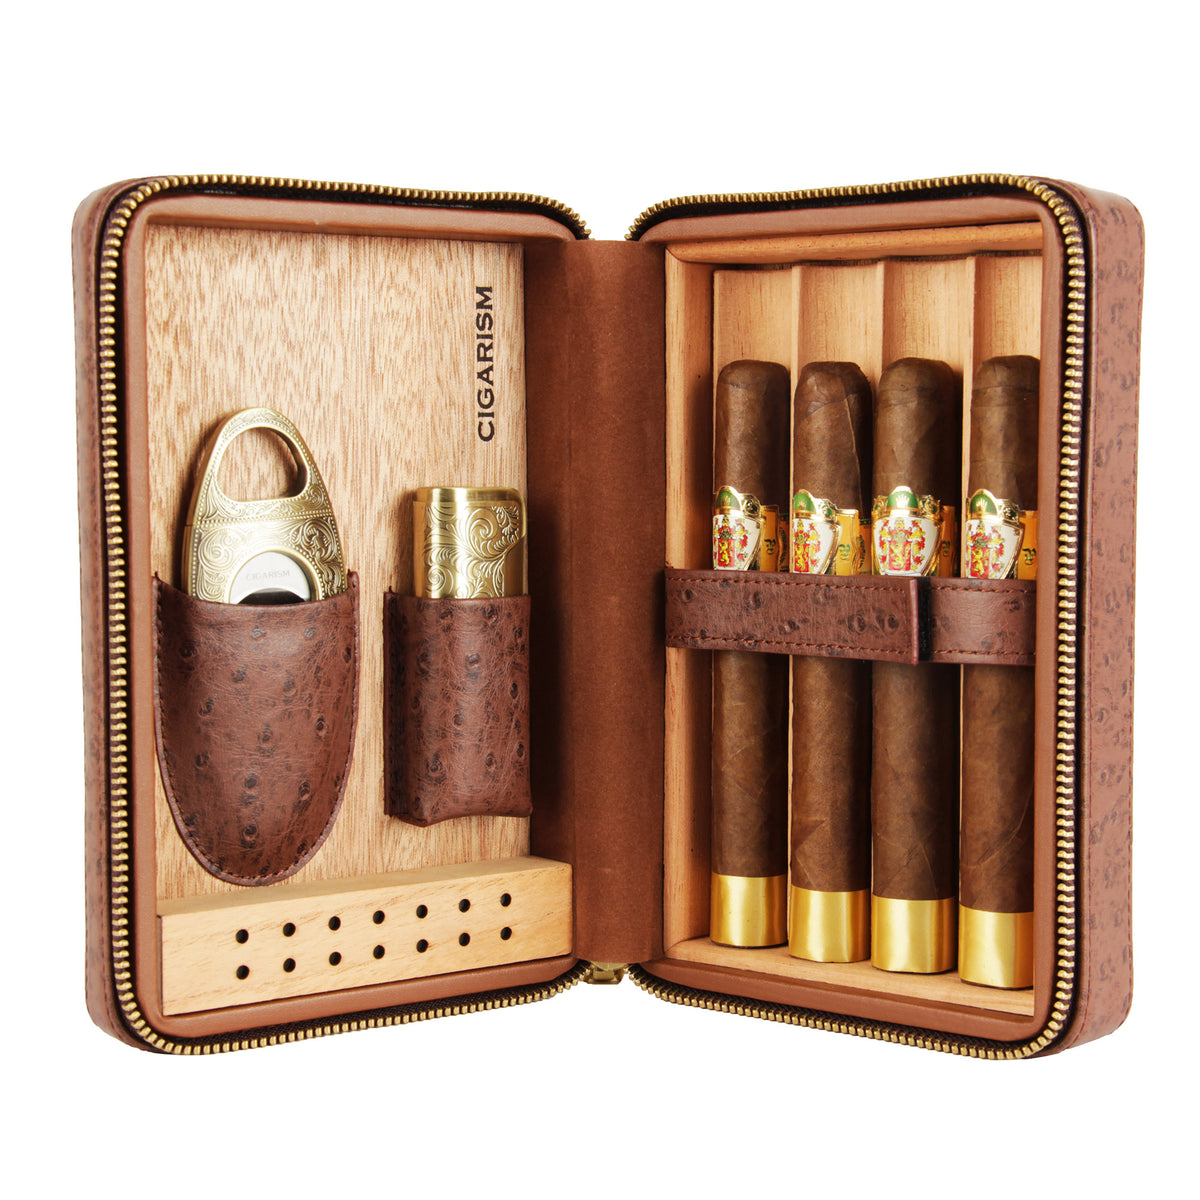 CIGARISM Genuine Leather Spanish Cedar Lined Cigar Travel Case Humidor  W/Cutter Lighter Set 4 Count (Ostrich)